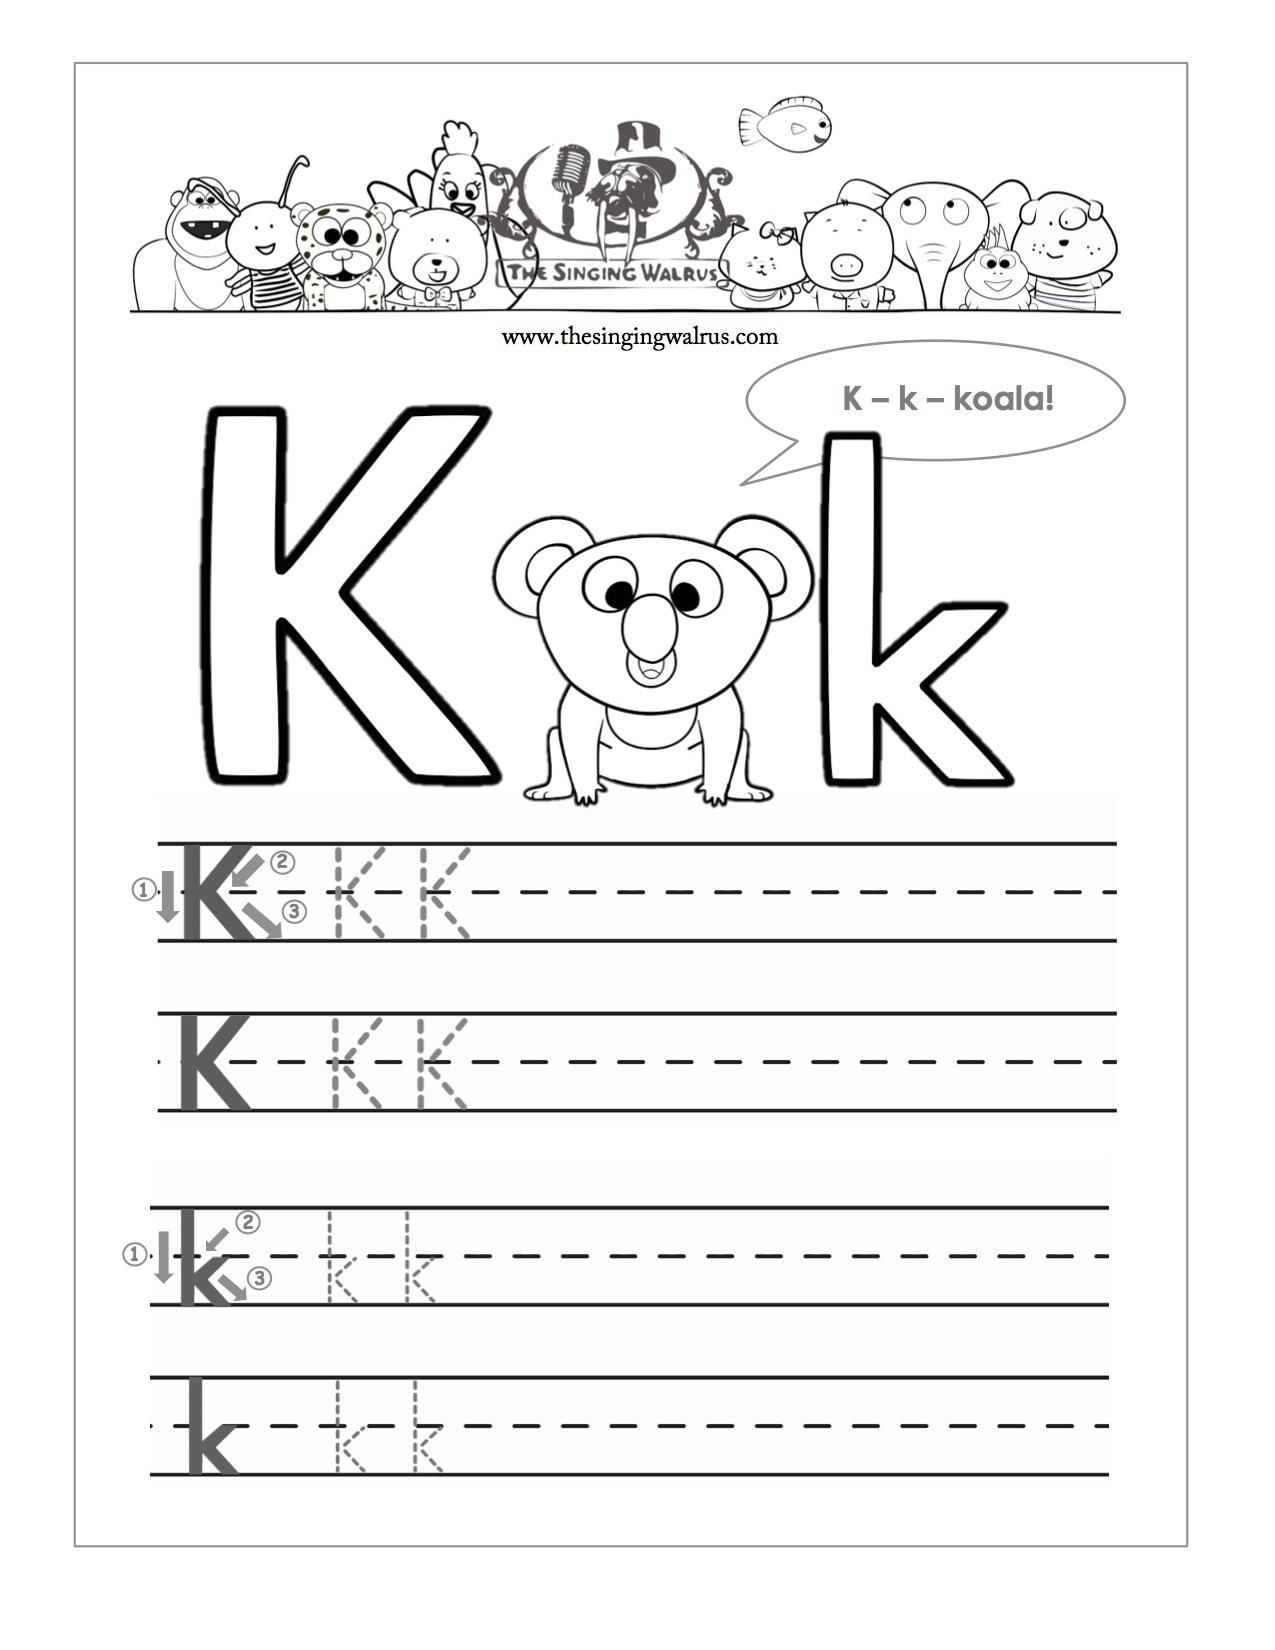 15 Learning The Letter K Worksheets | Kittybabylove pertaining to Letter K Worksheets Free